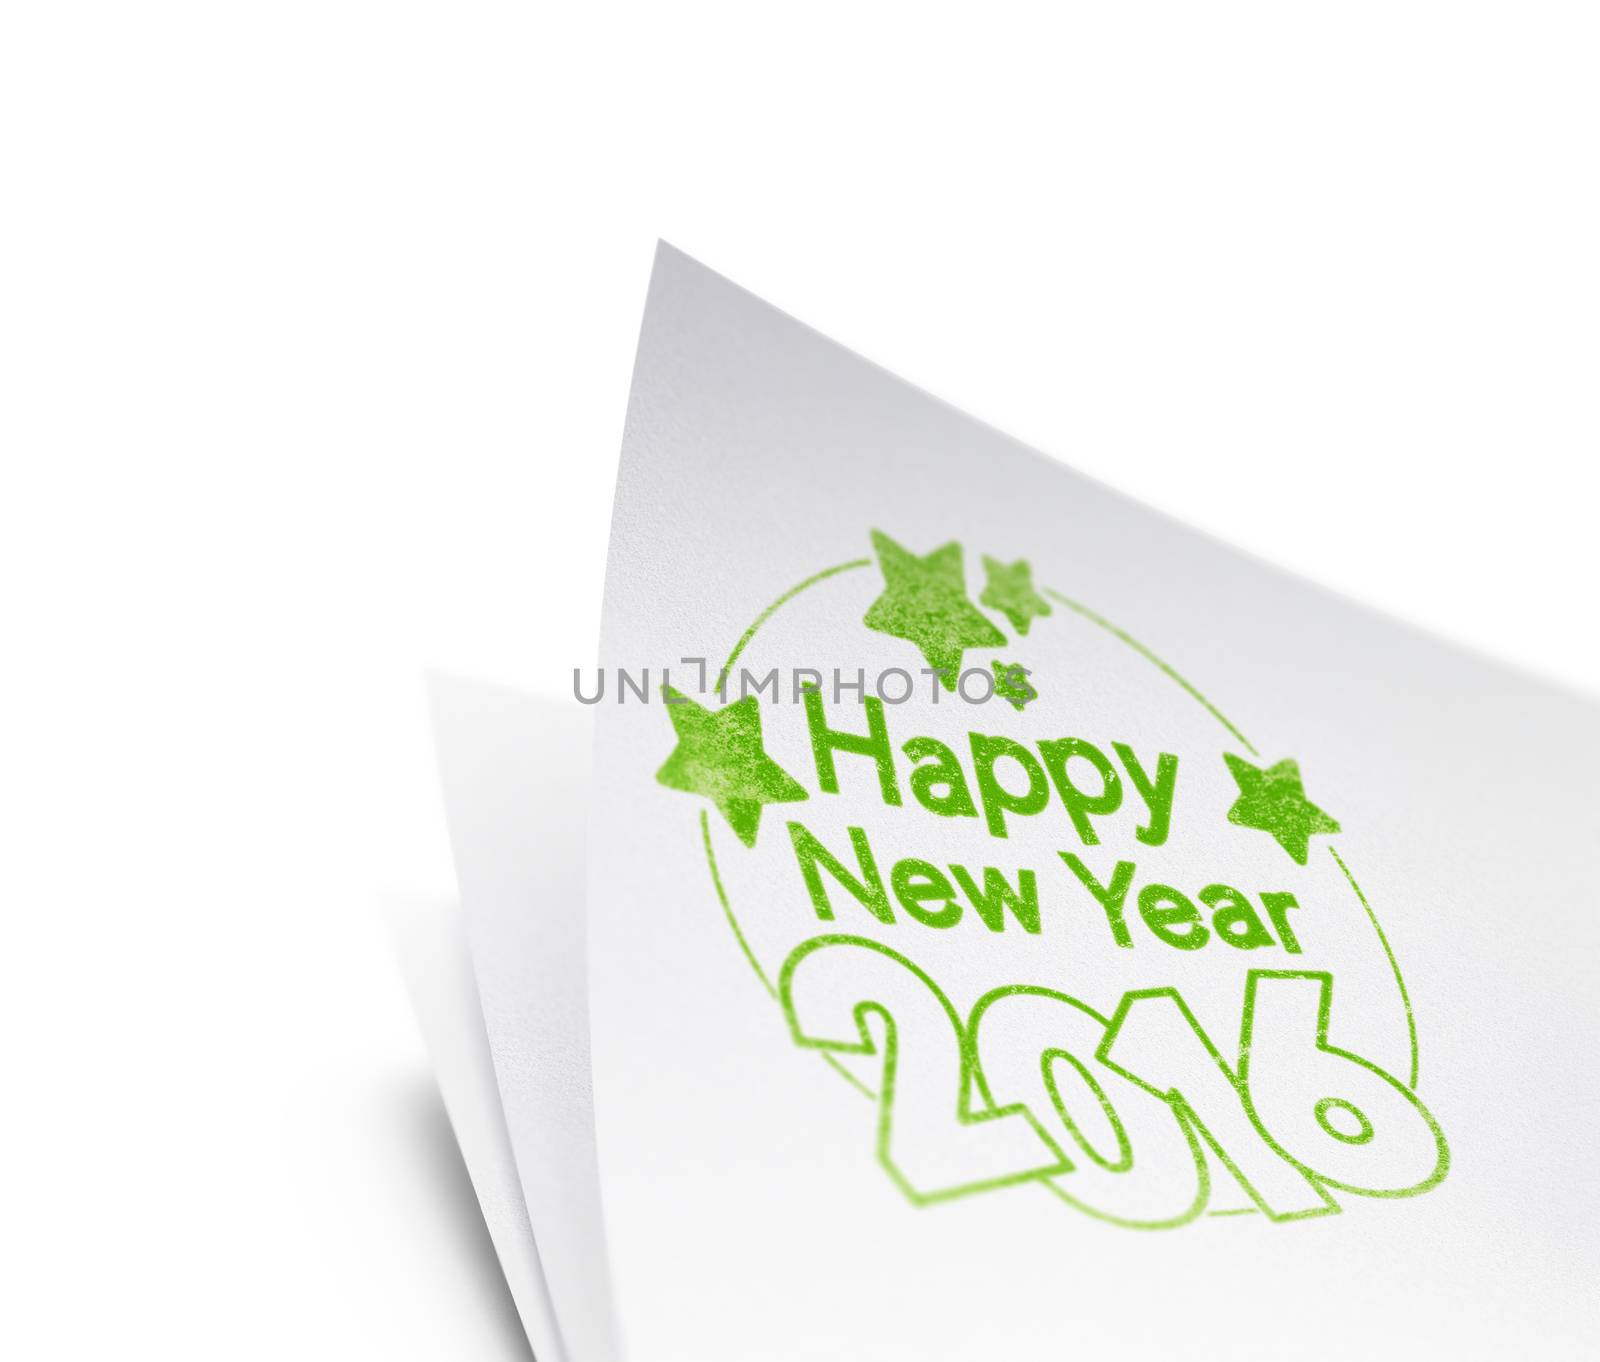 Rubber stamp with the text happy new year 2016 printed on a paper sheet over white background